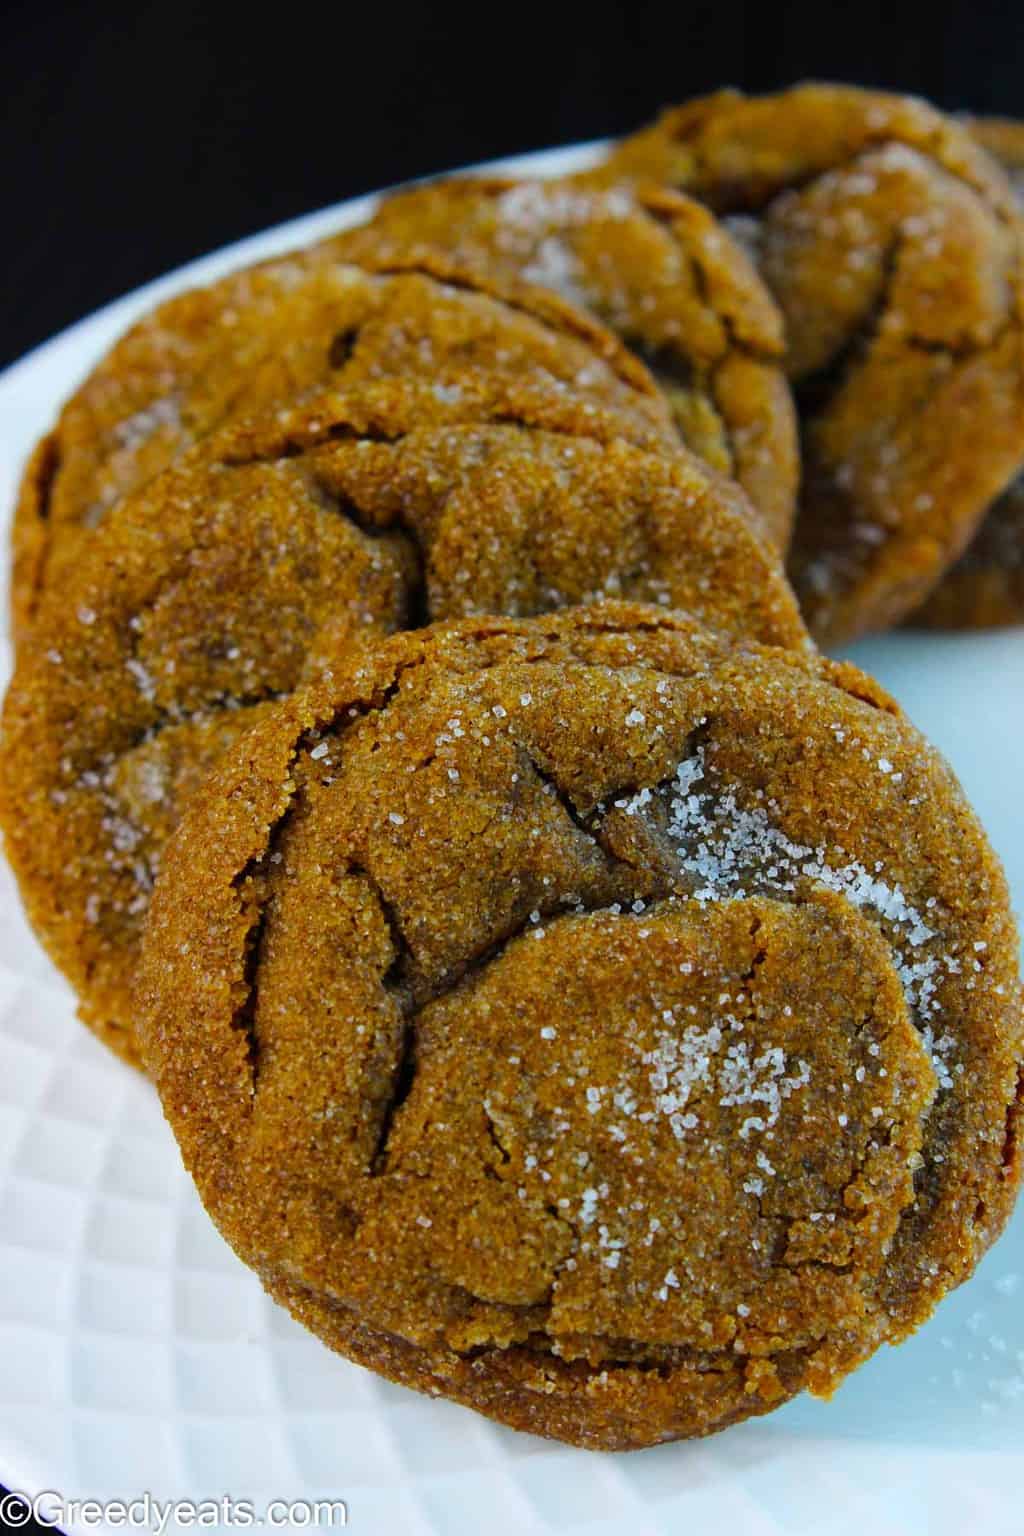 Soft, chewy and shiny with crinkly tops, these are seriously the Best Molasses Cookie recipe ever!